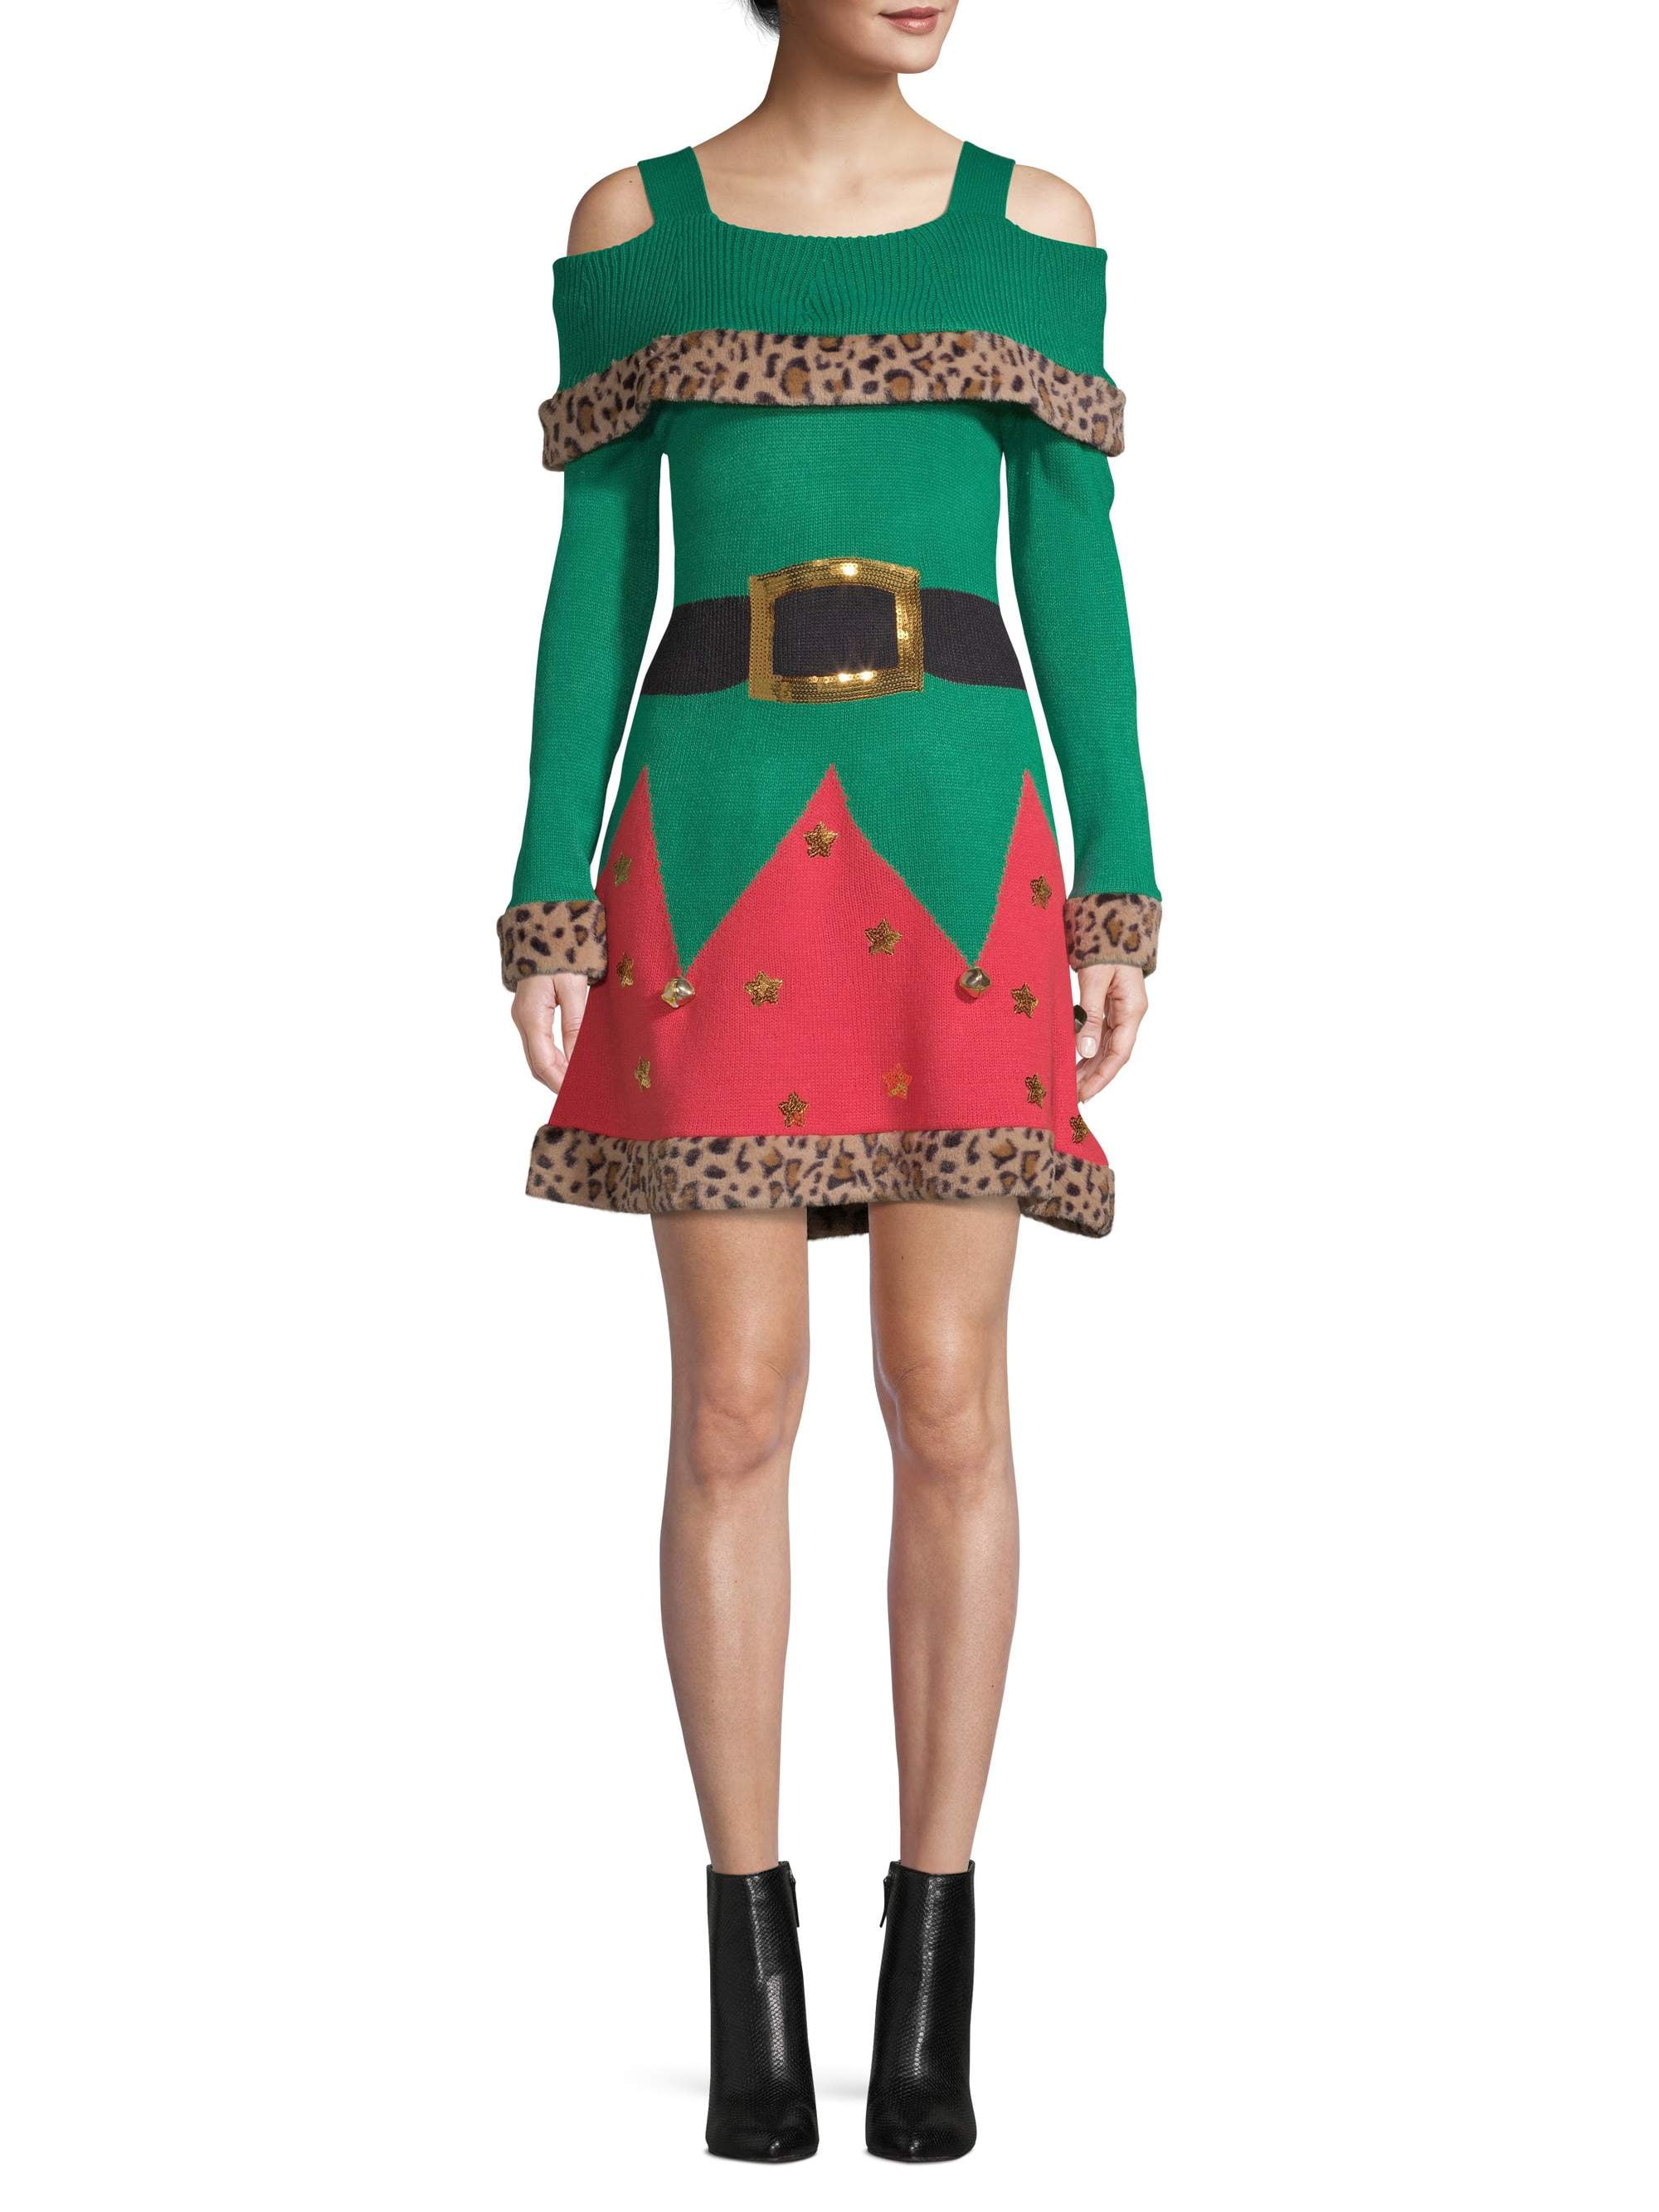 Buy > ugly christmas sweater dress womens > in stock